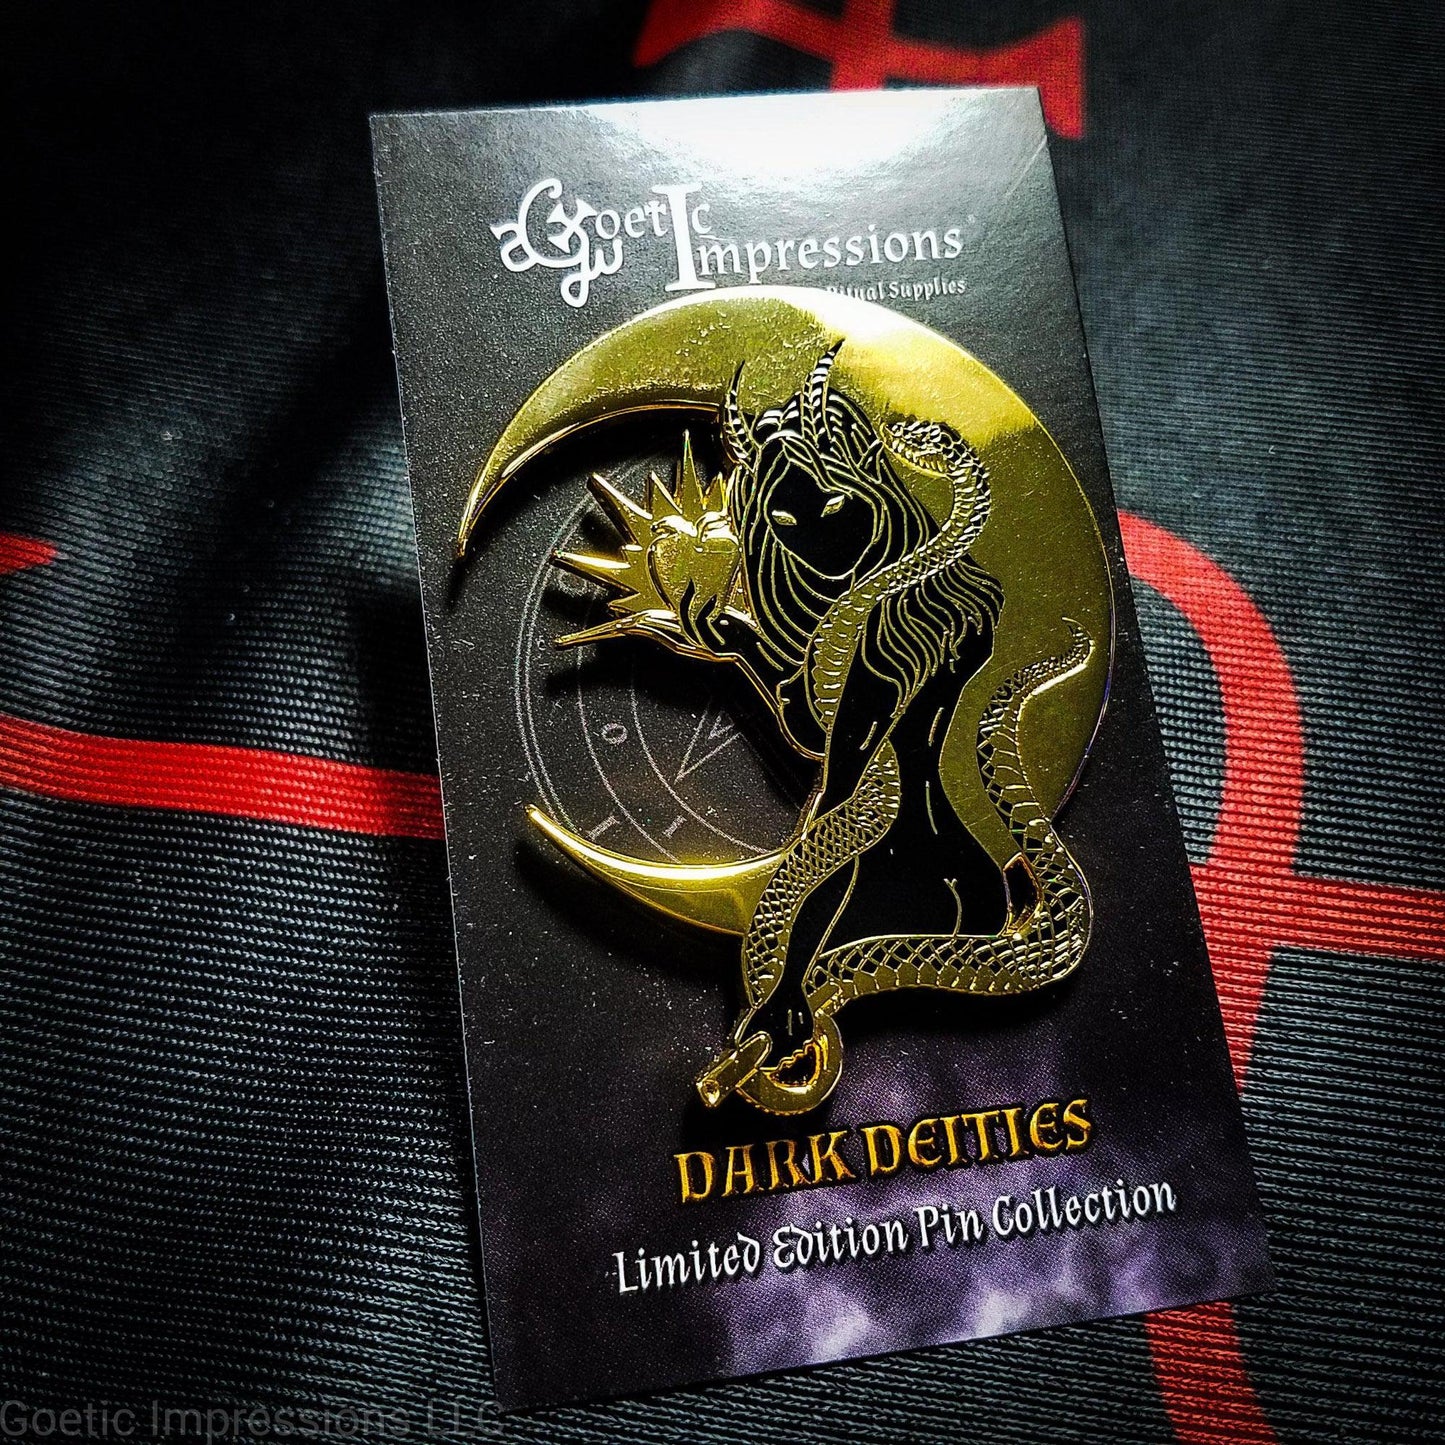 A black and gold hard enamel pin of Lilith. Lilith is holding a shining apple in one hand and a rod and circle in the other. Her one arm is coiled with a serpent. A cresent moon is behind her. The pin is positioned on a Goetic Impressions card back.